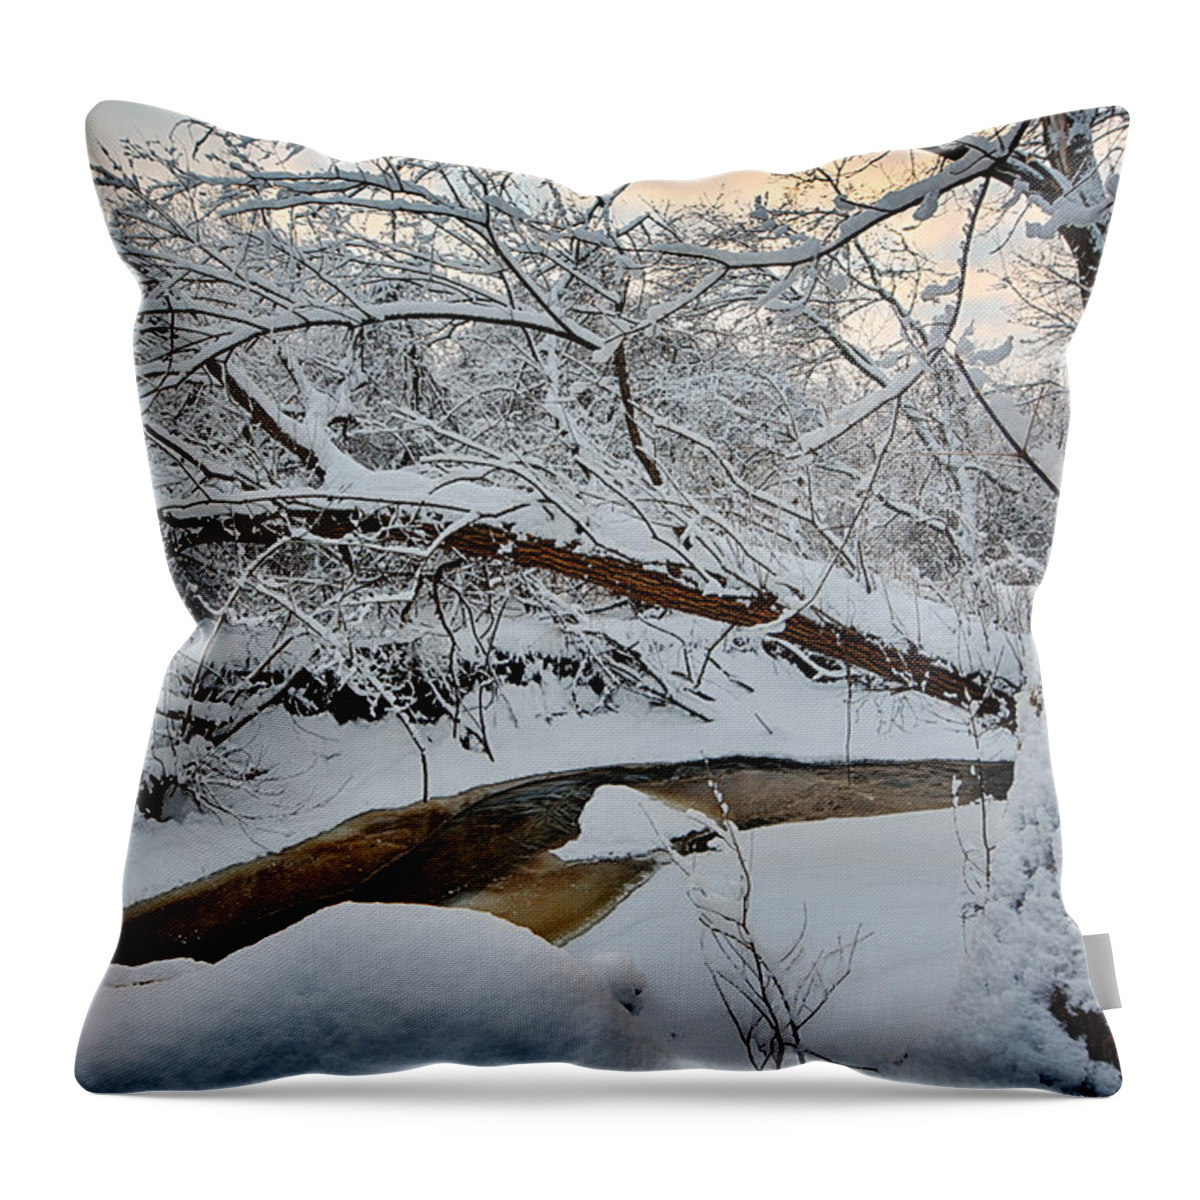 Clouds Throw Pillow featuring the photograph Frozen Creek by Sebastian Musial